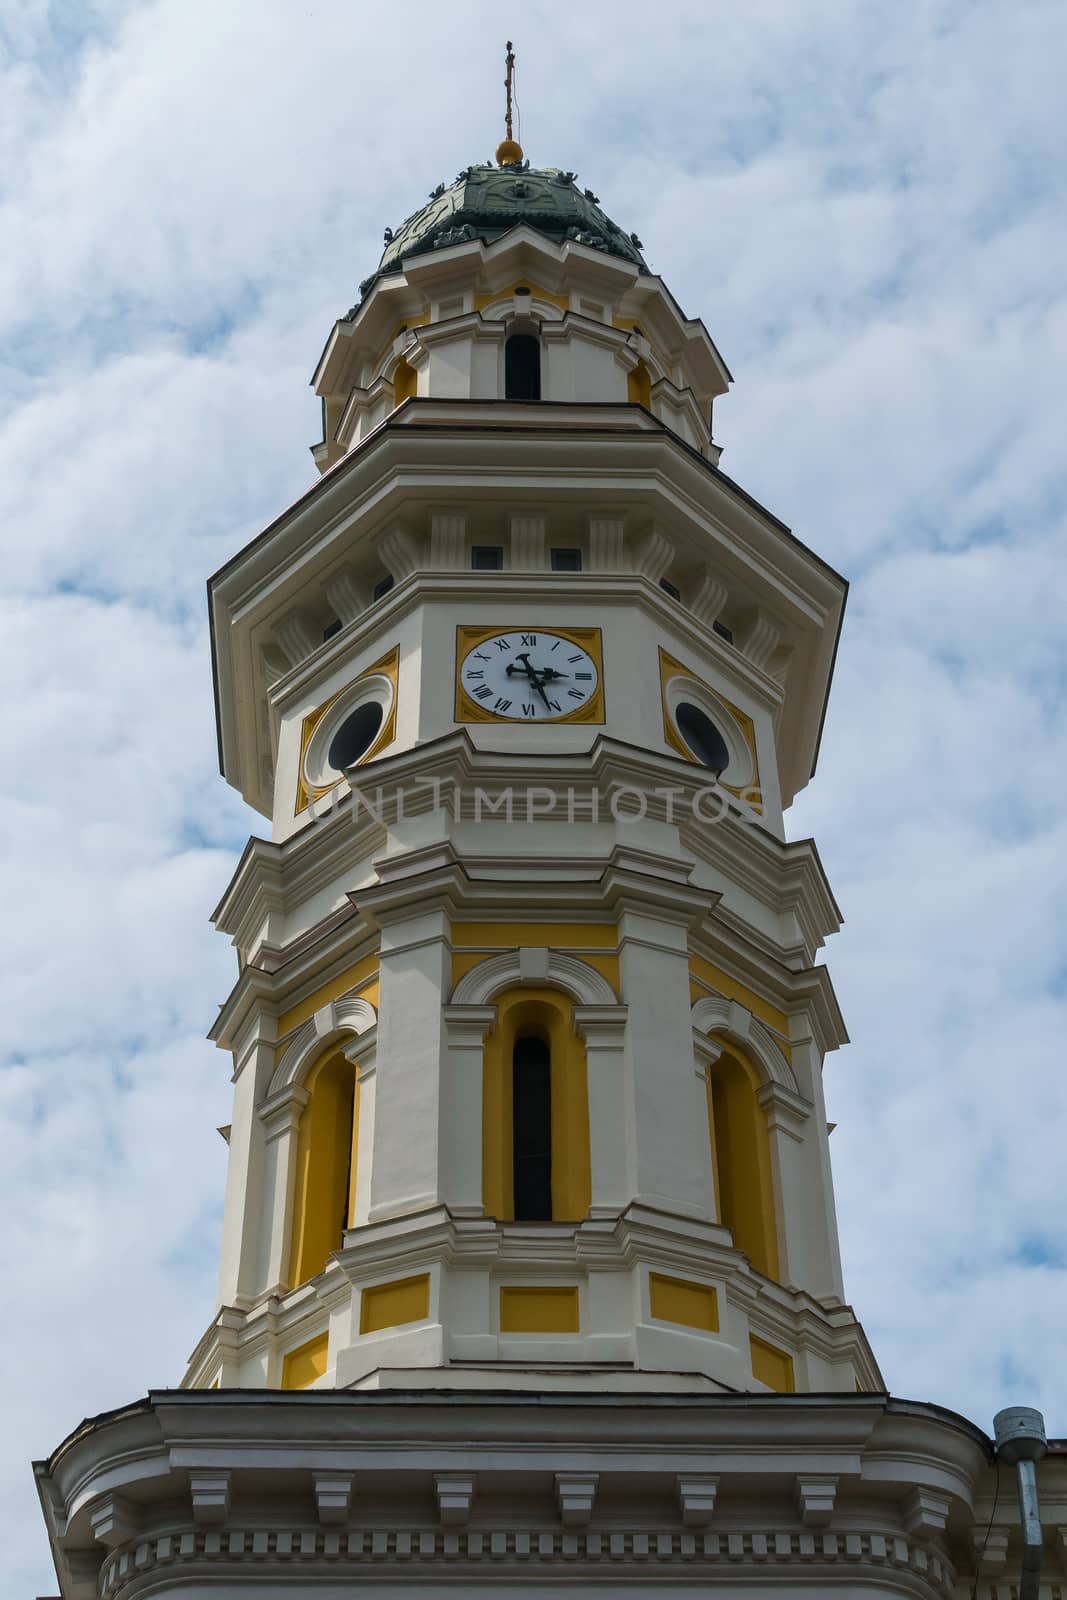 Ancient beautiful tower with a clock with a pointed spire on the top piercing the heavens